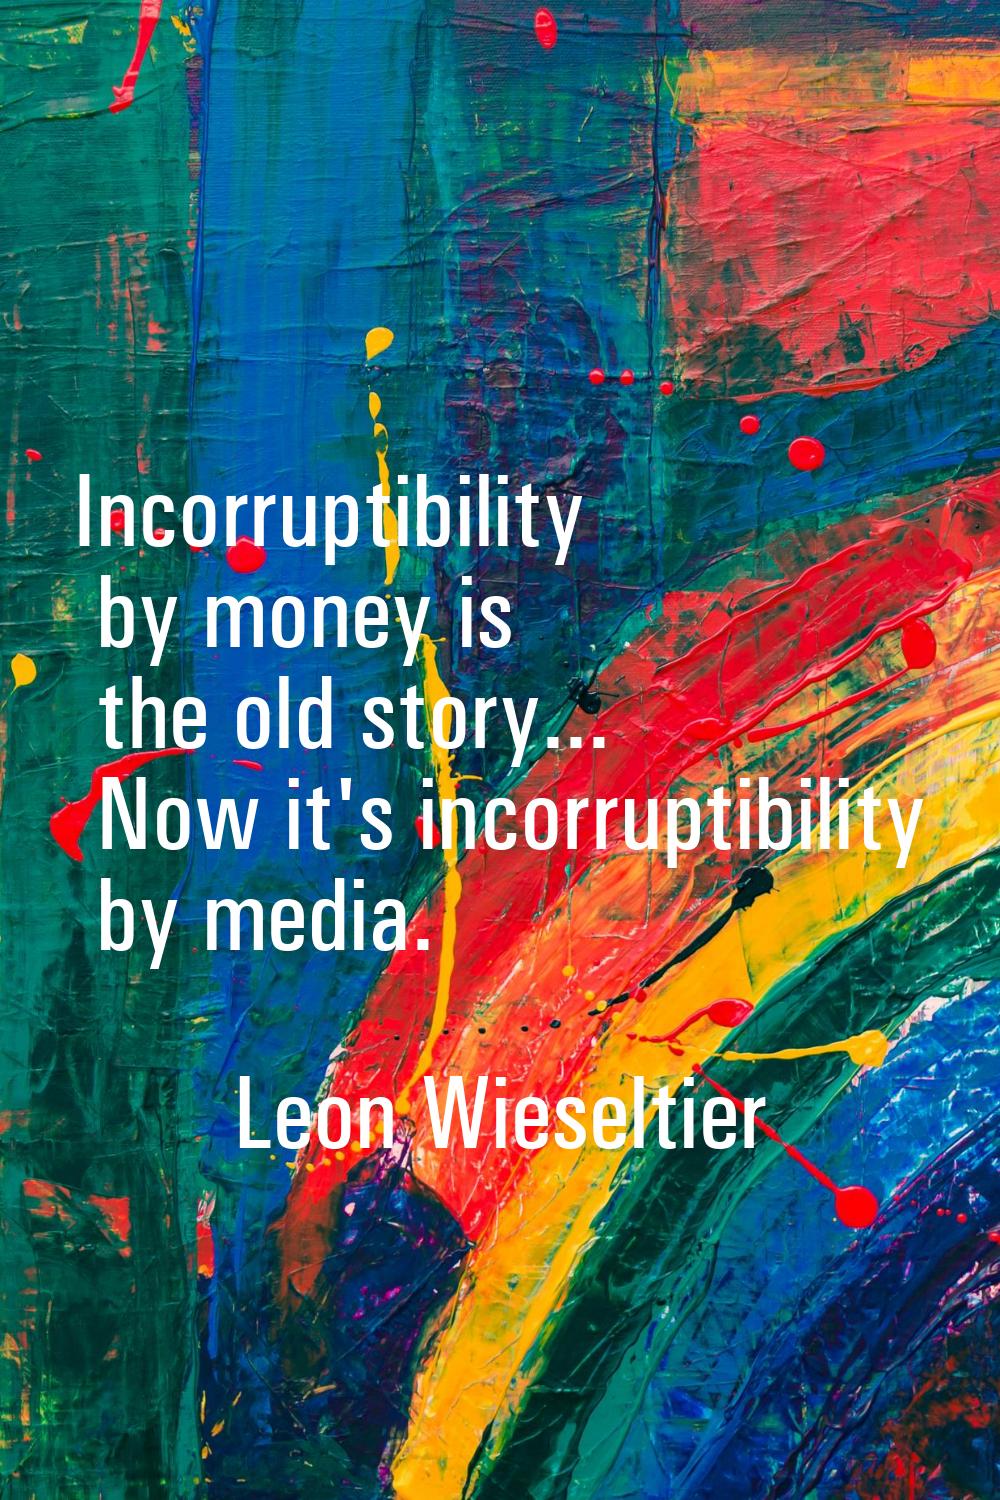 Incorruptibility by money is the old story... Now it's incorruptibility by media.